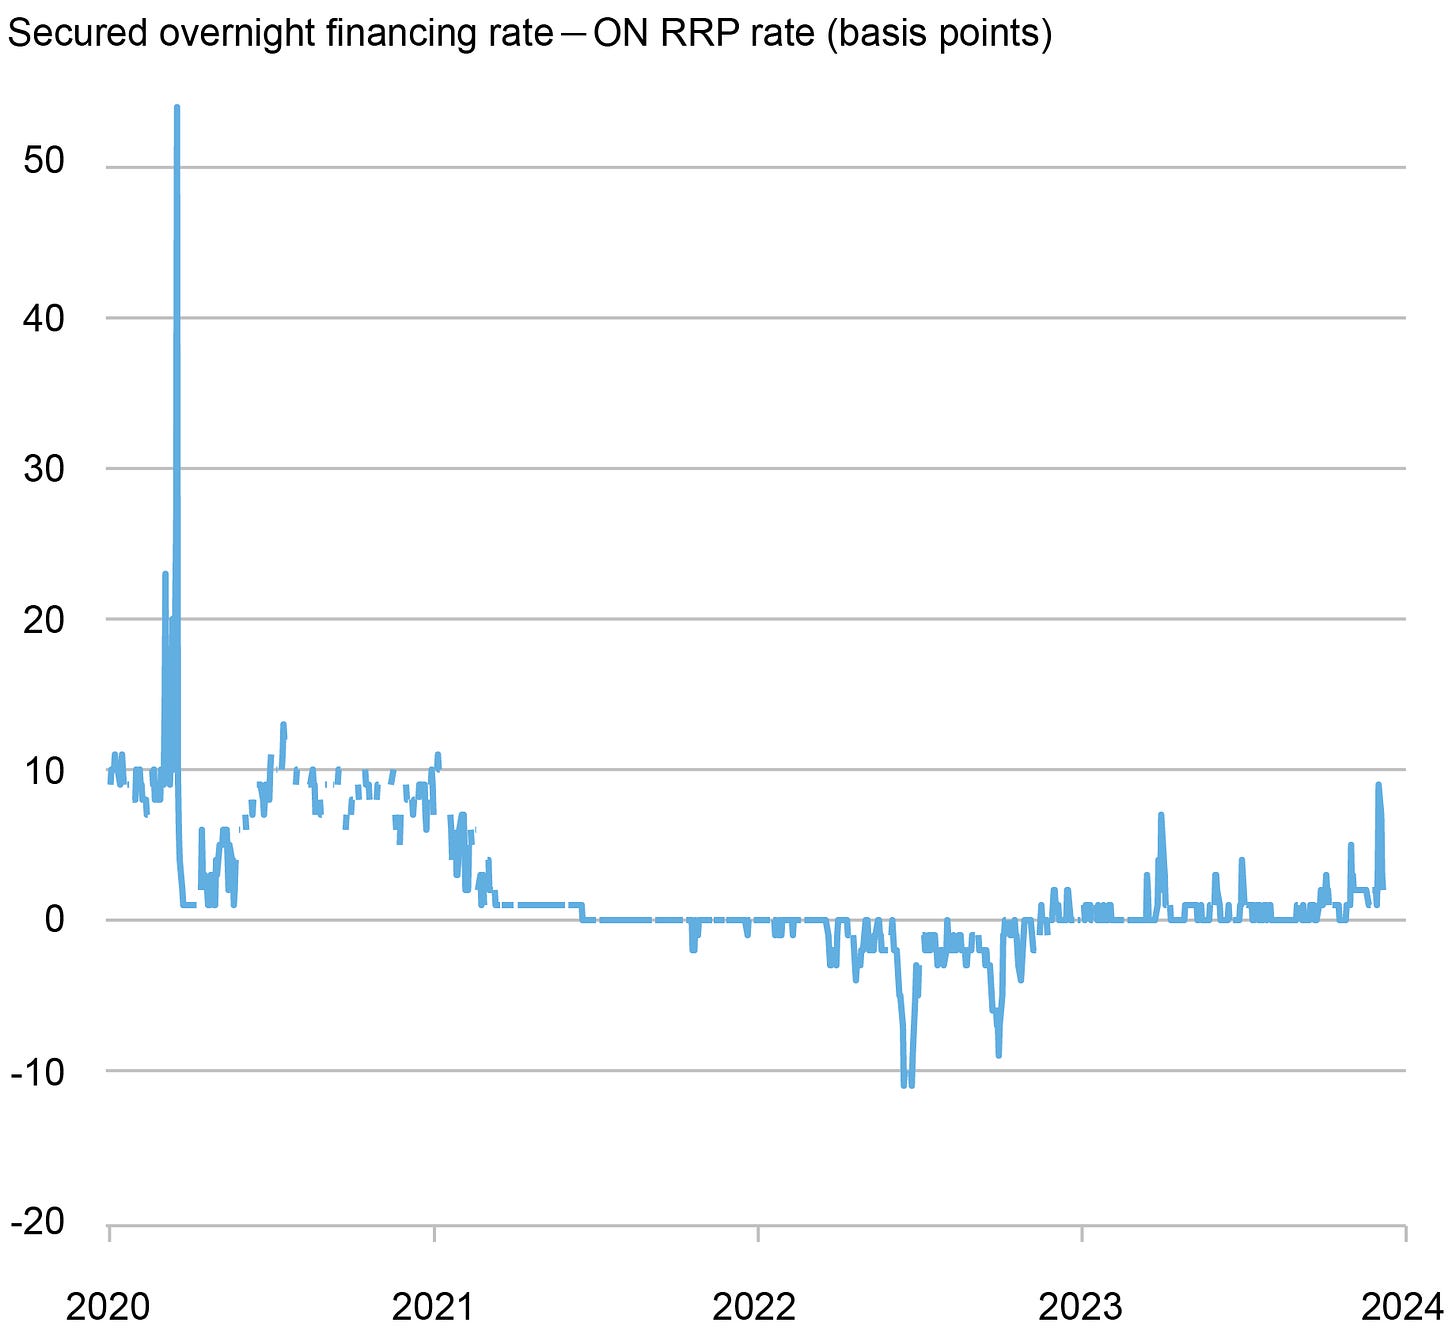 A blue single-line chart depicts the spread between the secured overnight financing rate and the ON RRP rate in basis points from 2020 through the end of 2024. The rate differential has been positive since early 2023.